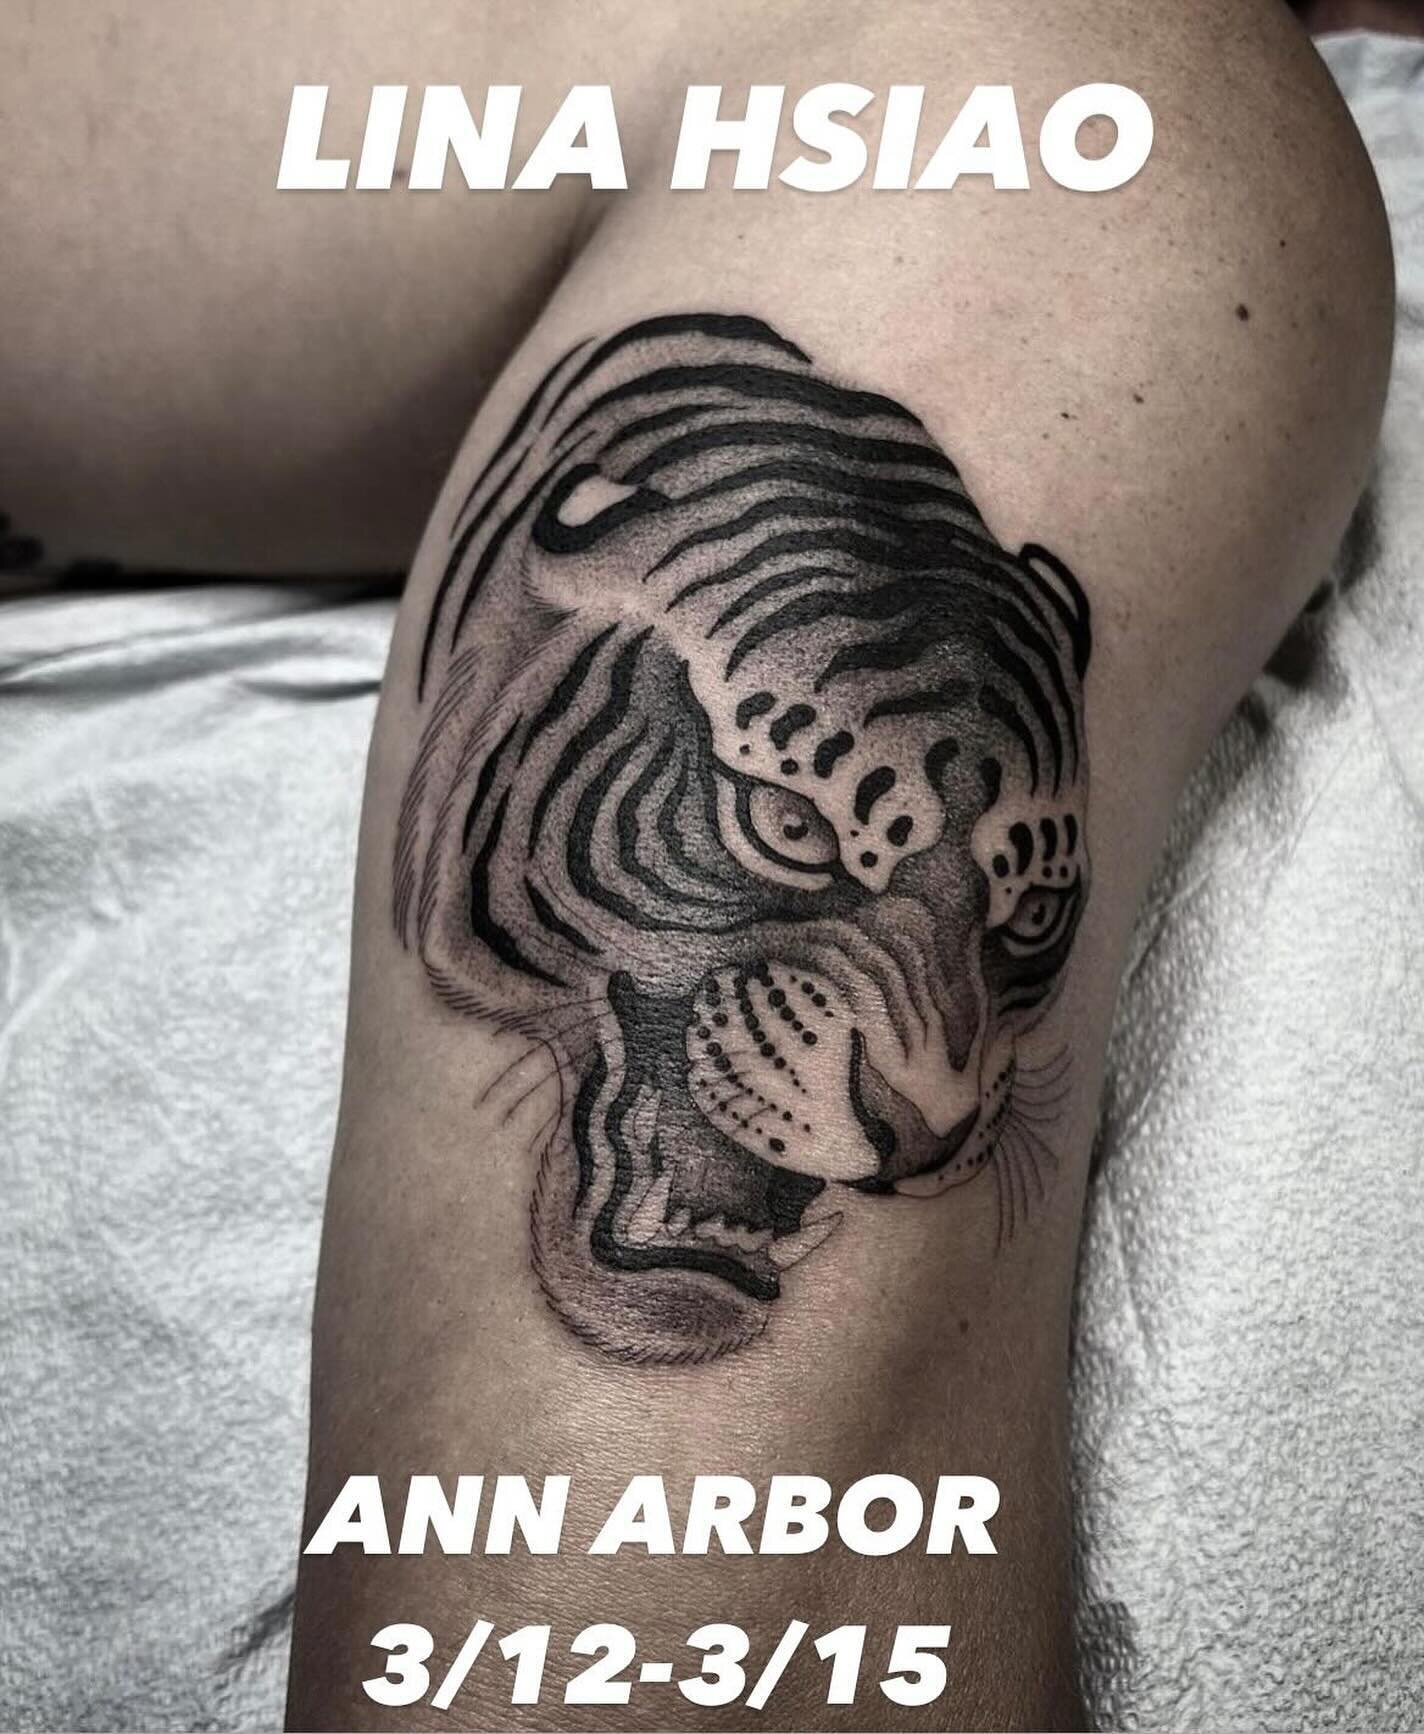 We are excited to have @linahsiaotattoo joining us next month! DM or email linahsiaotattoo@gmail.com to book an appointment.